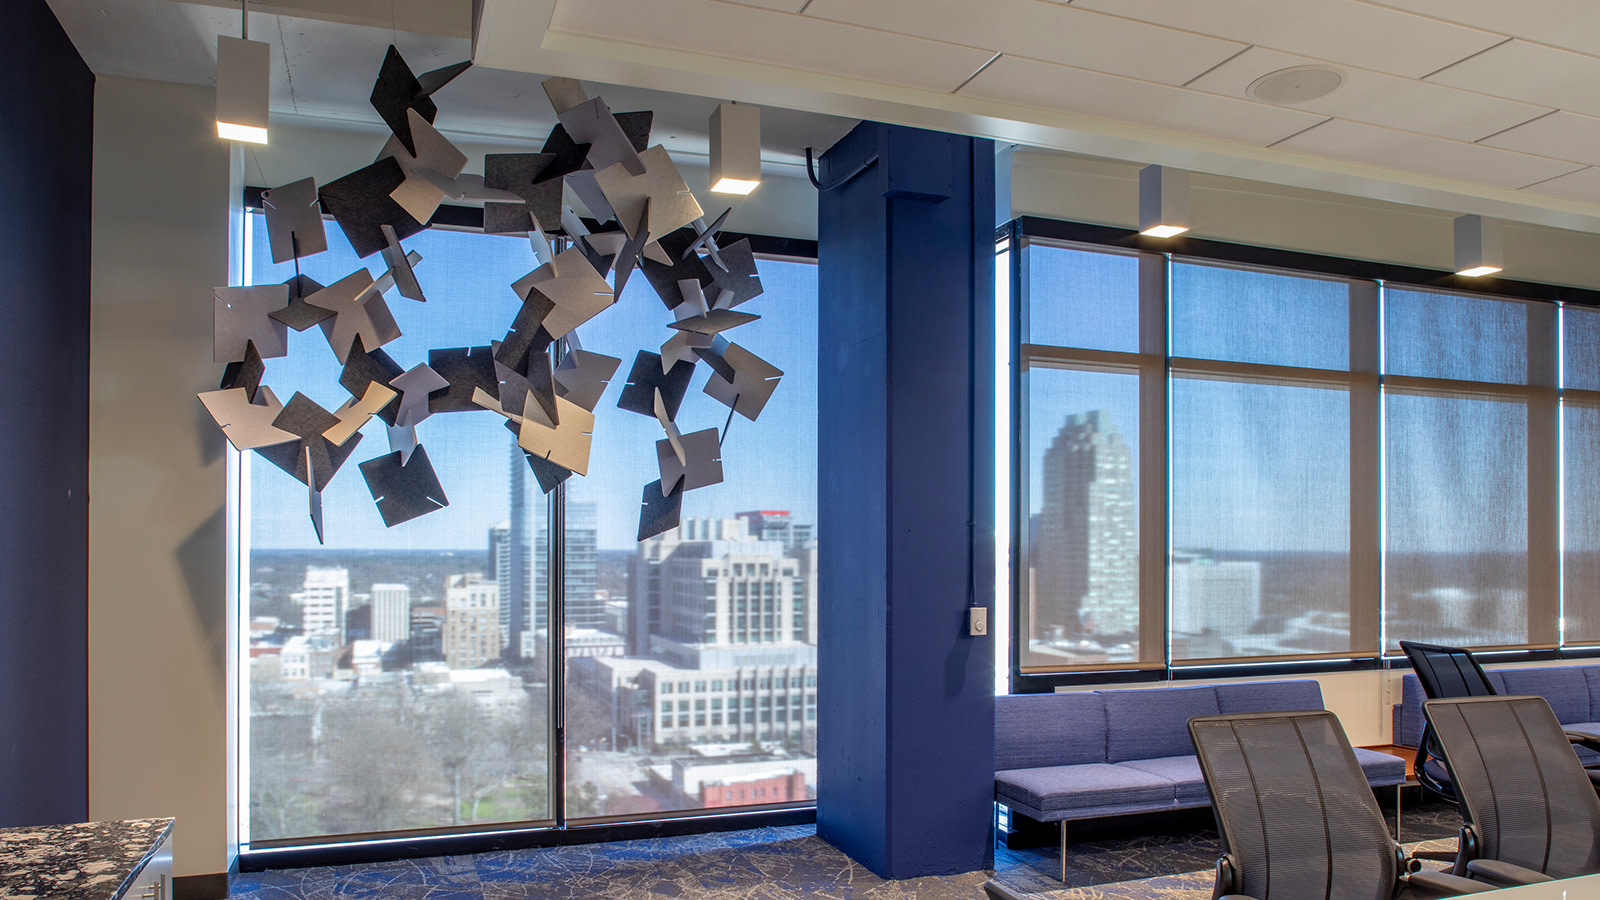 A decorative mobile with acoustic elements in the Arch Insurance headquarters